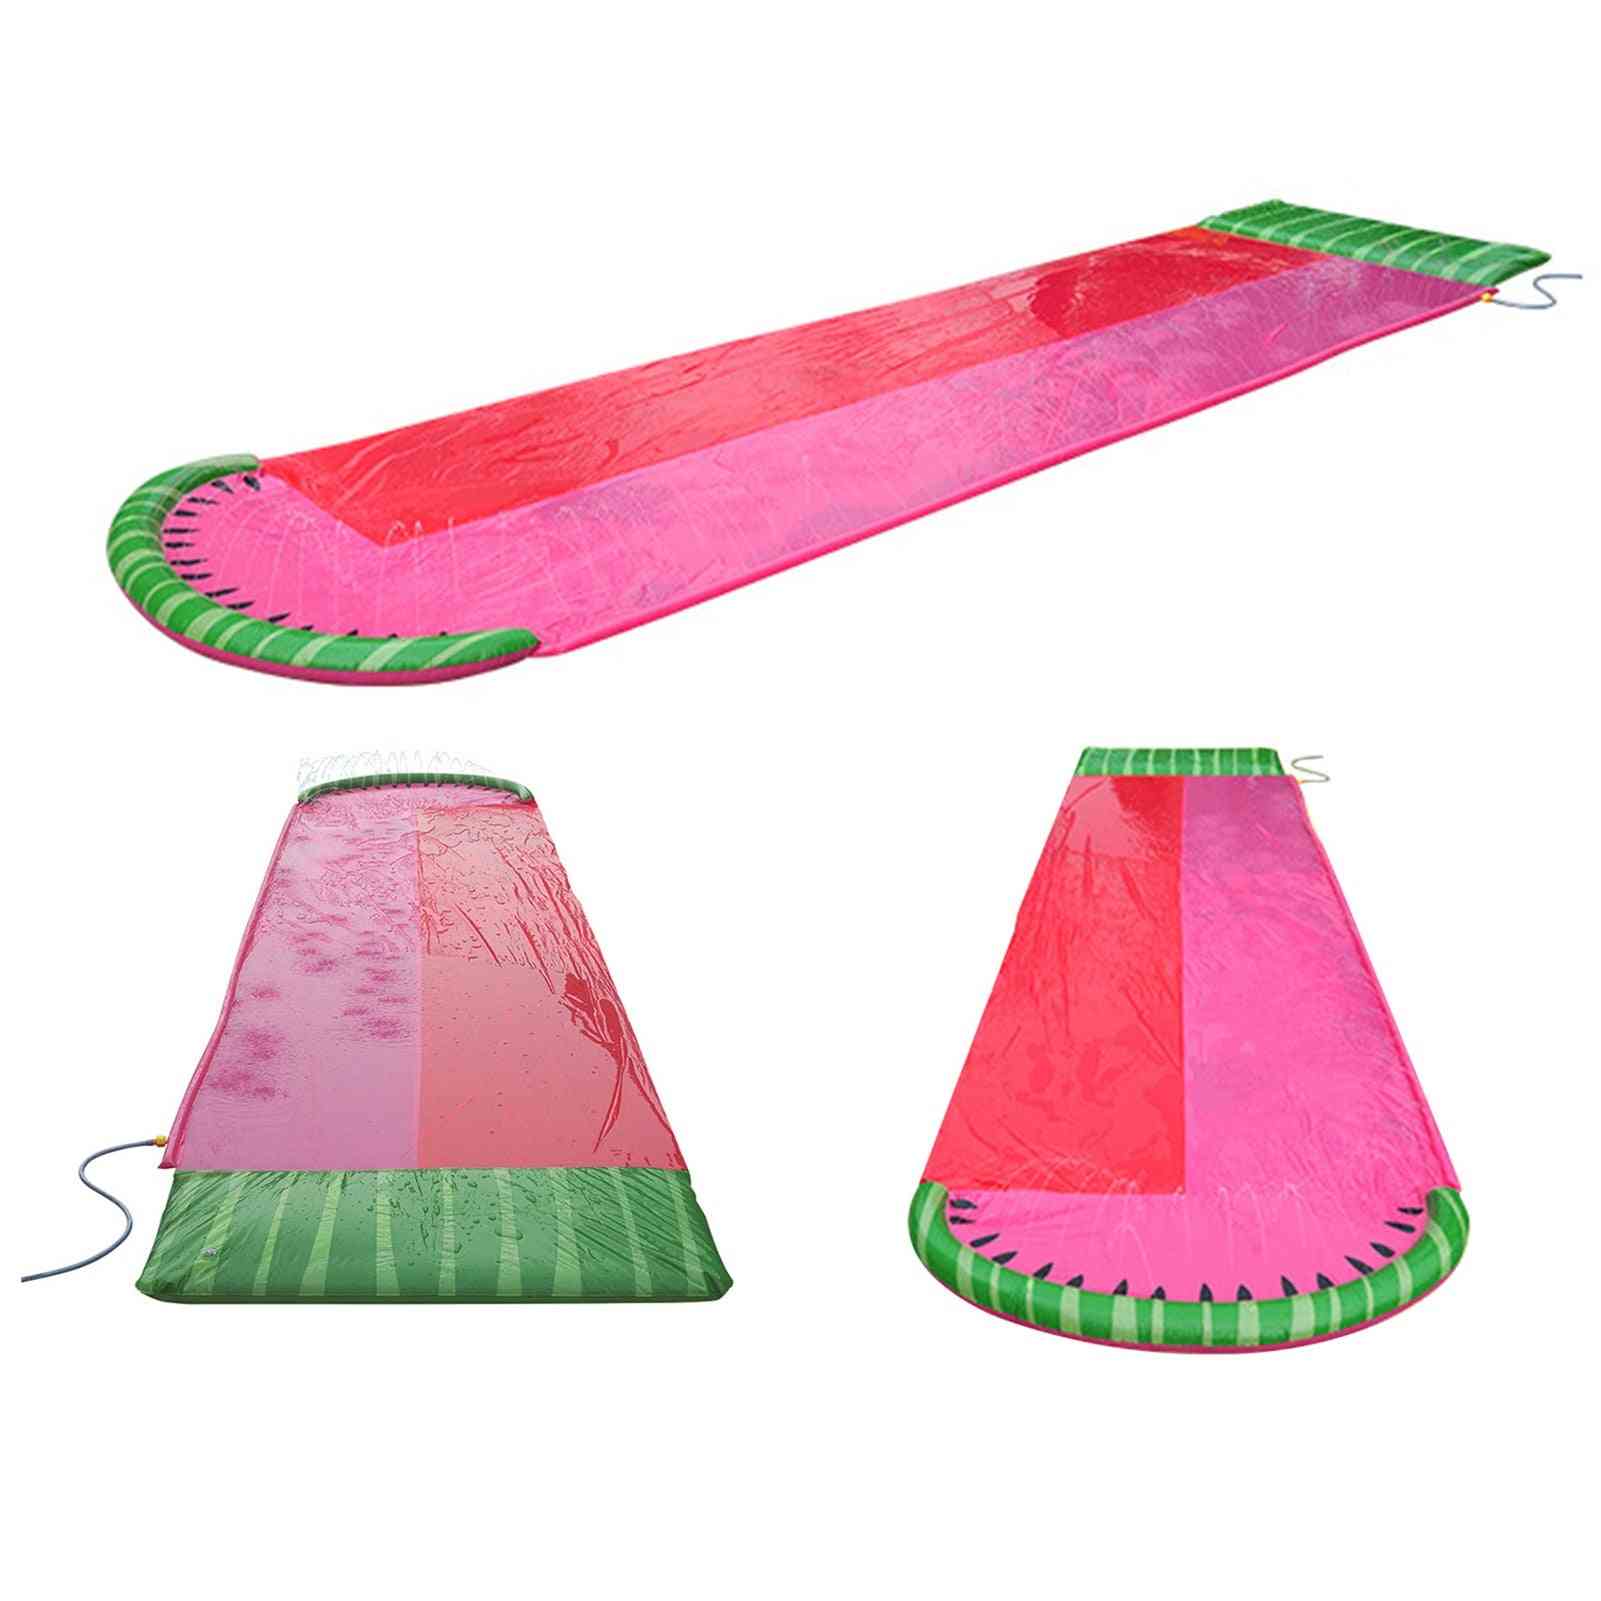 Outdoor Surfboard Water Games With Crash Pad